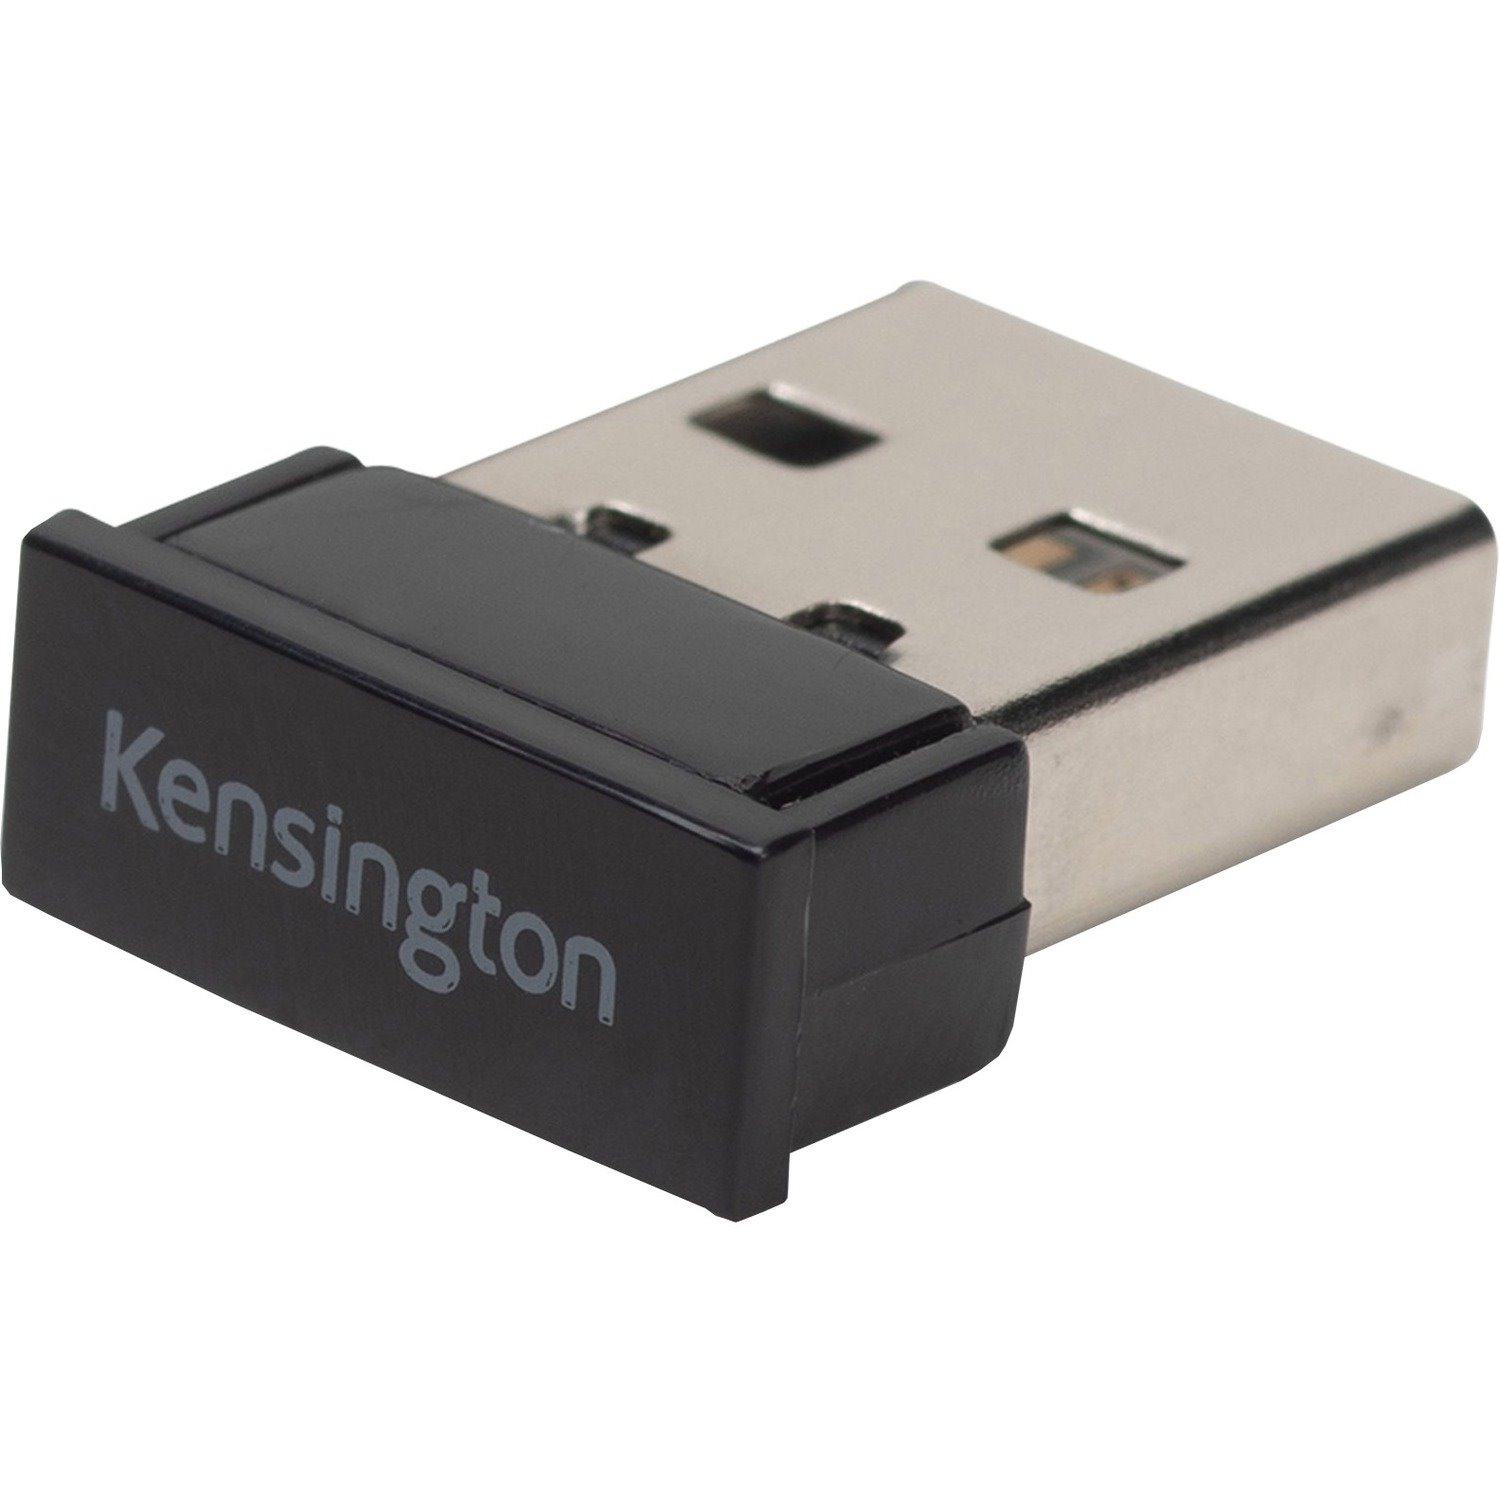 Kensington Bluetooth 4.0 Wi-Fi/Bluetooth Combo Adapter for Keyboard/Mouse